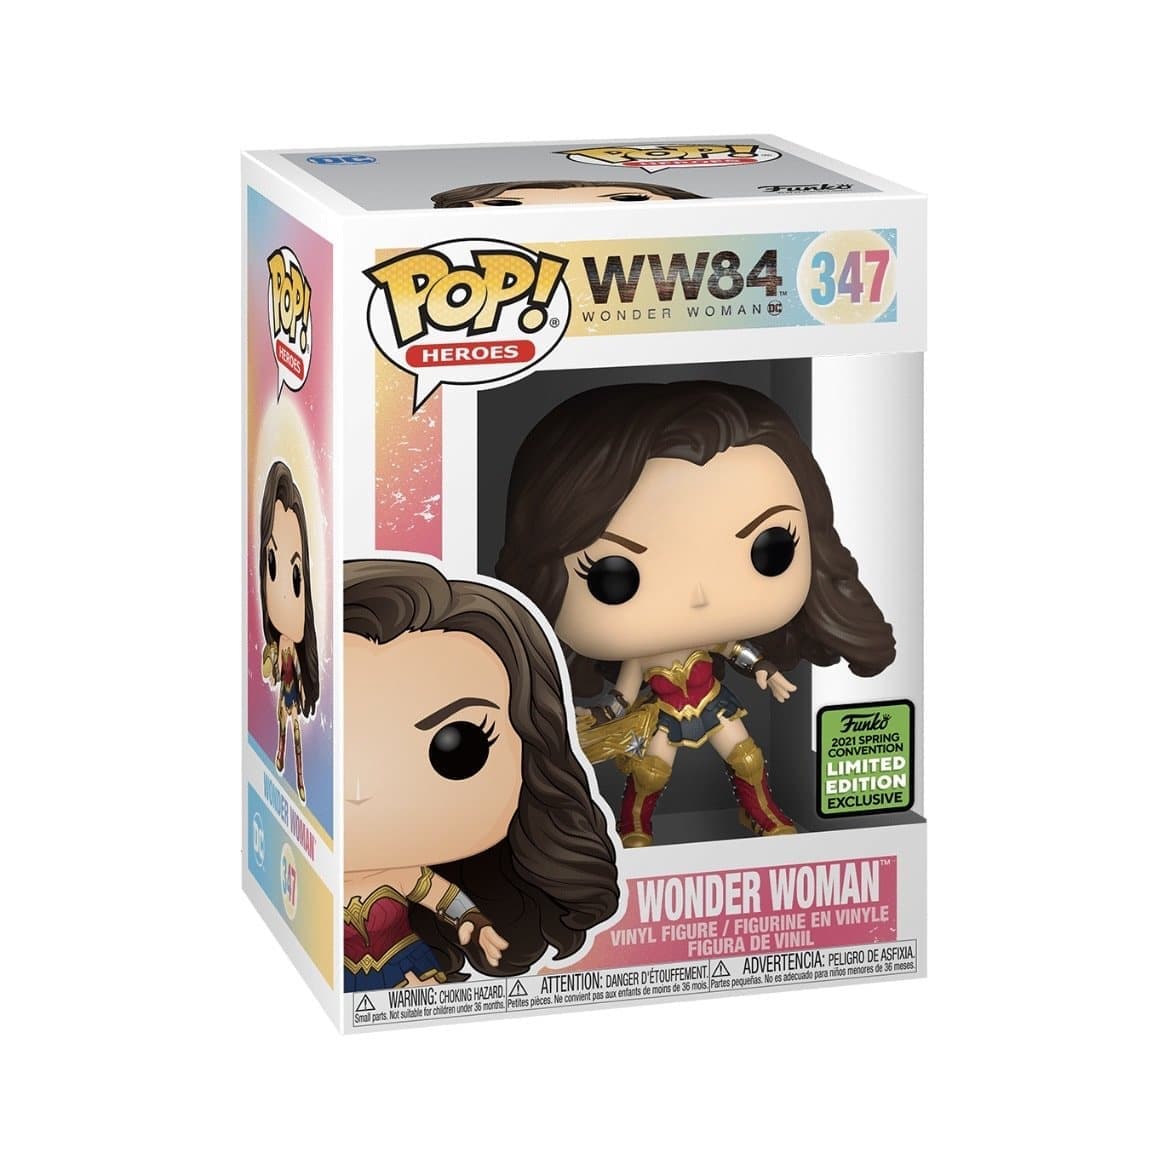 Wonder Woman #347 Funko Pop! WW84, ECCC 2021 Shared Exclusive - Angry Cat